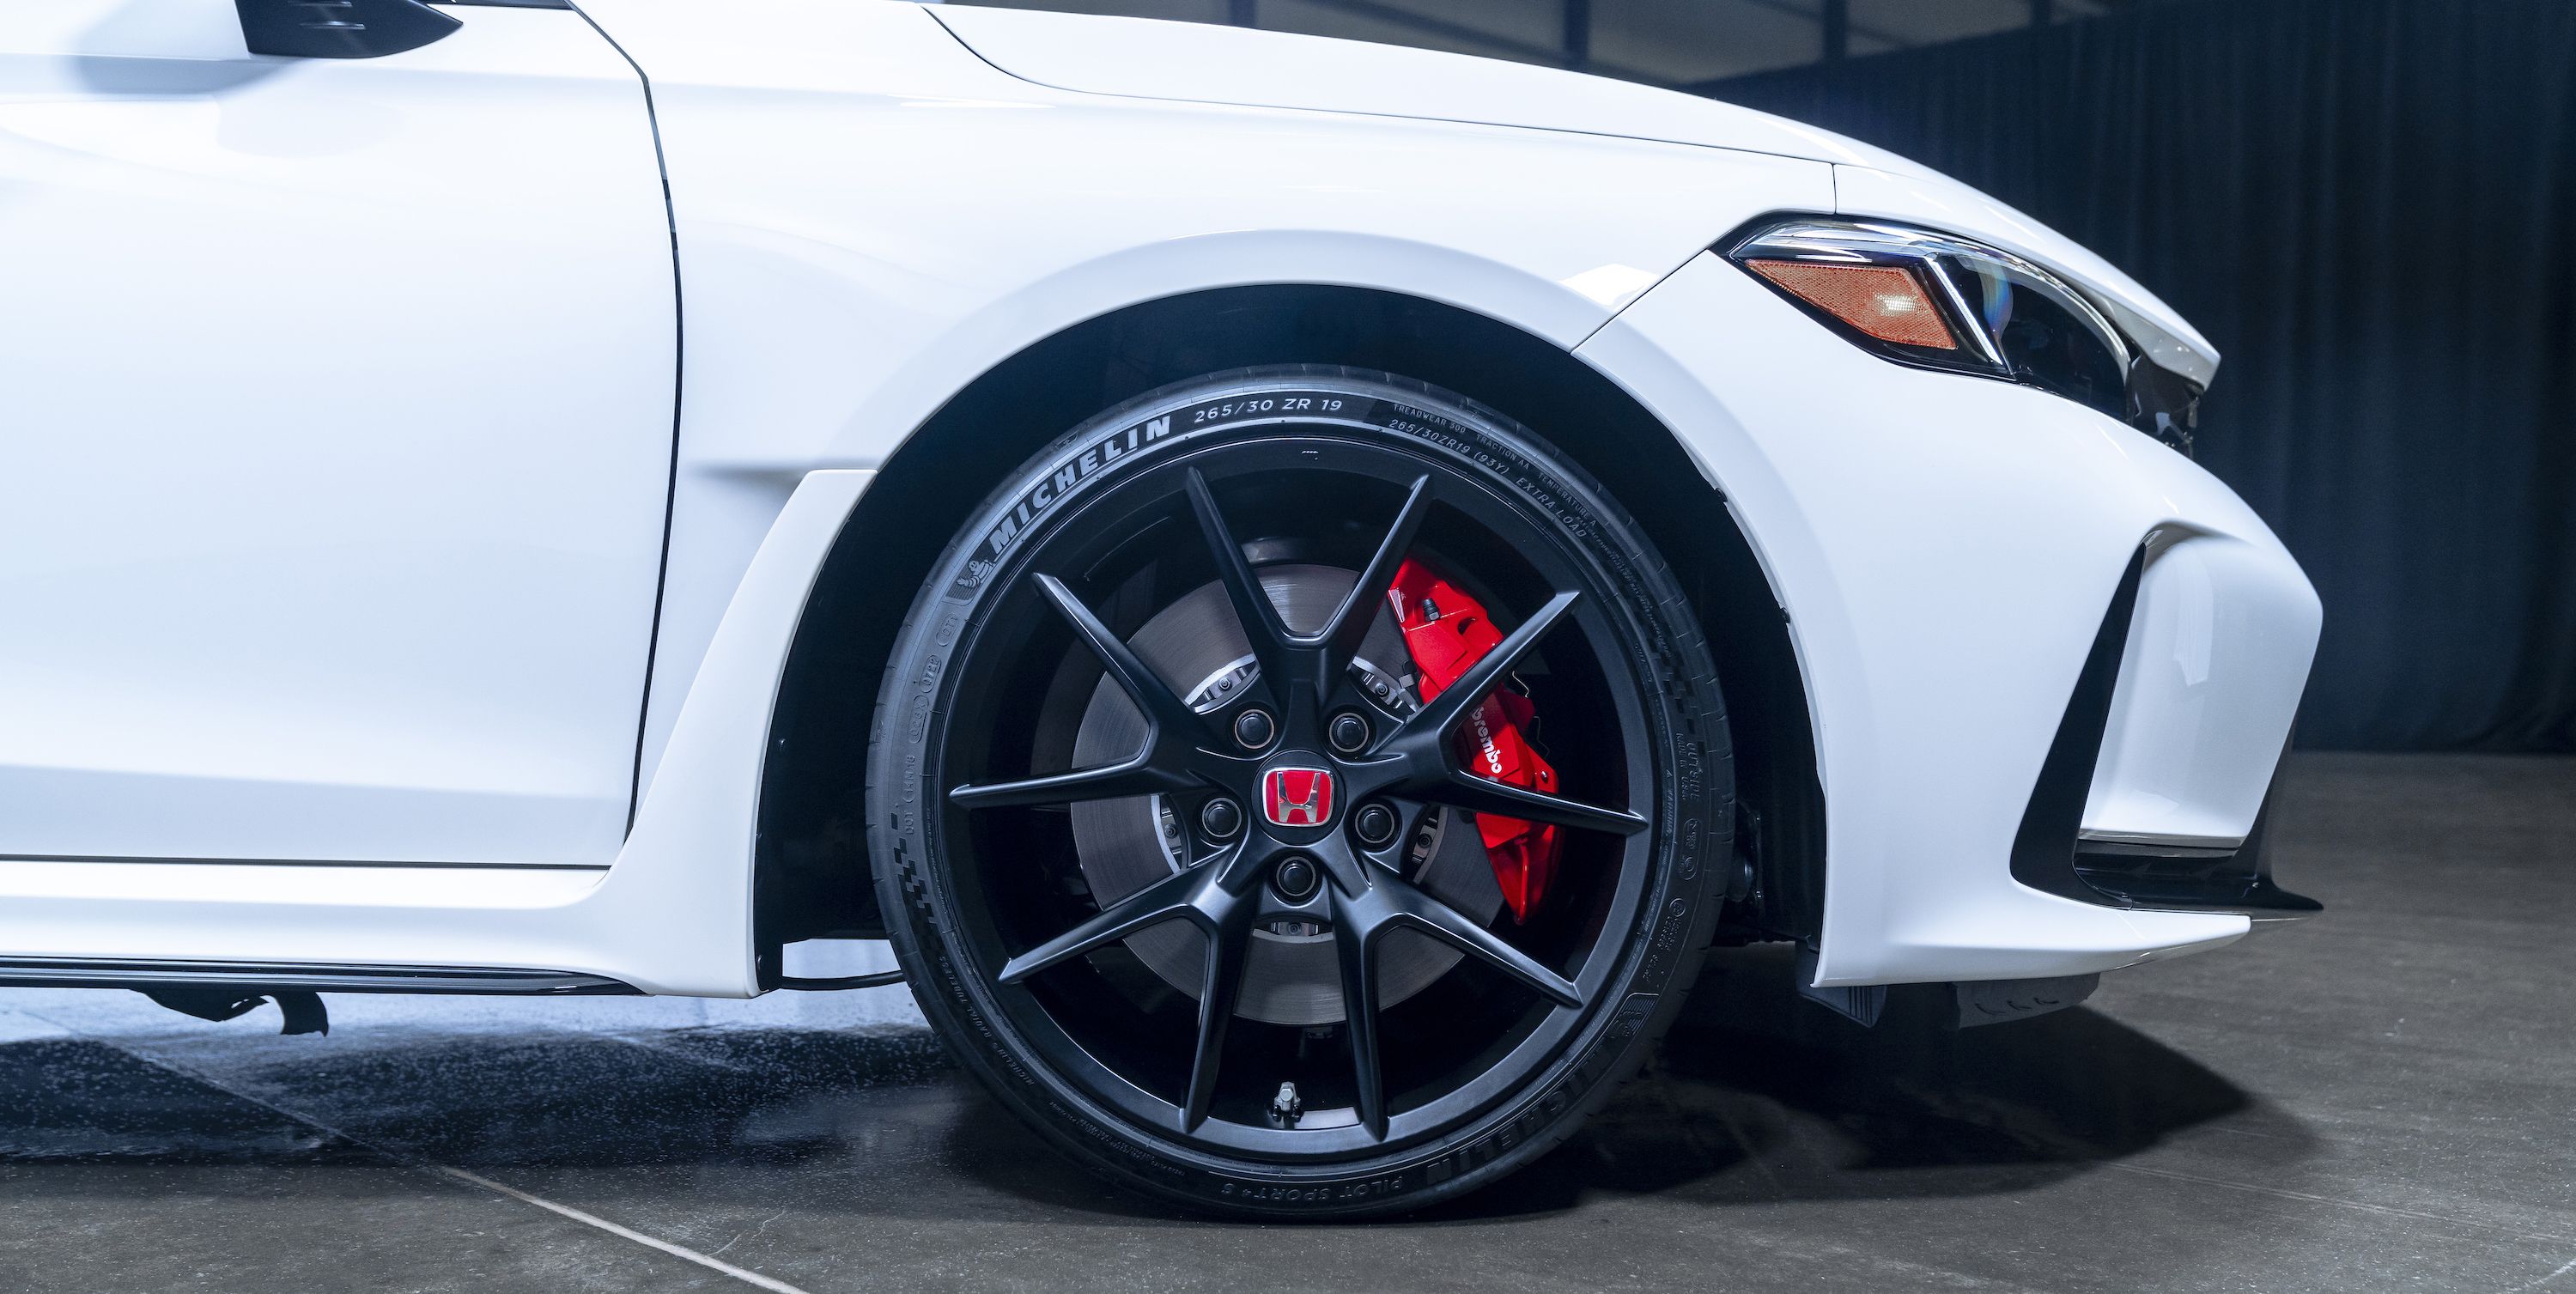 The New Civic Type R Does Something Interesting With Its Wheels